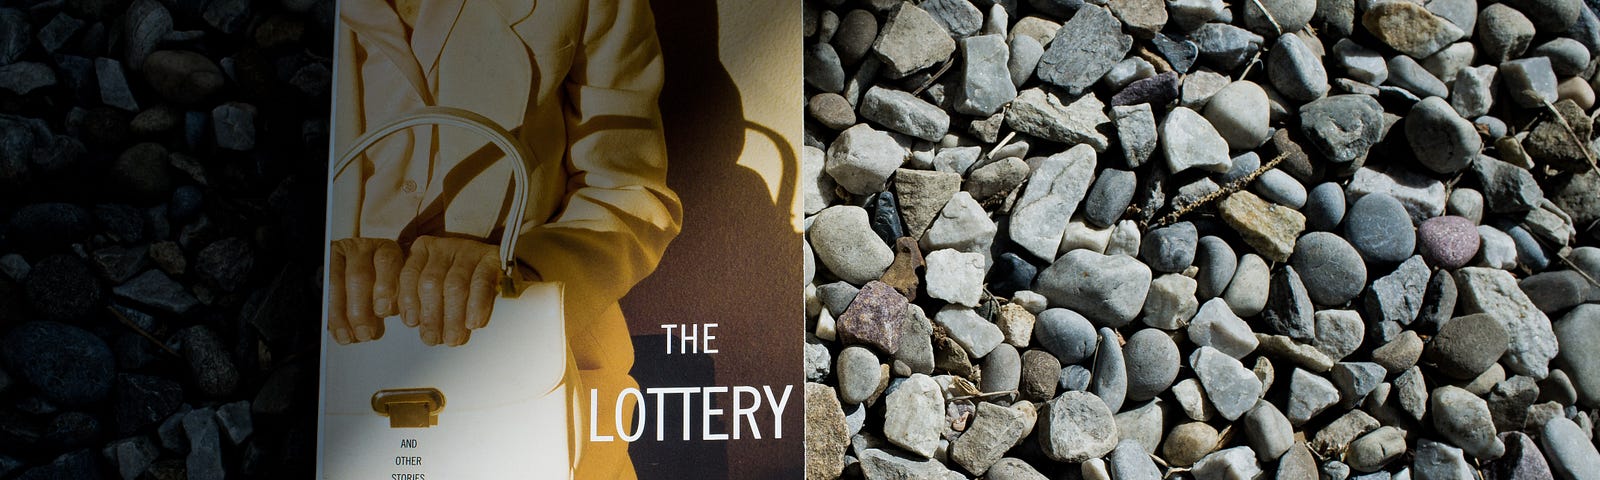 Shirley Jackson book, The Lottery and Other Stories, sitting on a bed of stones.